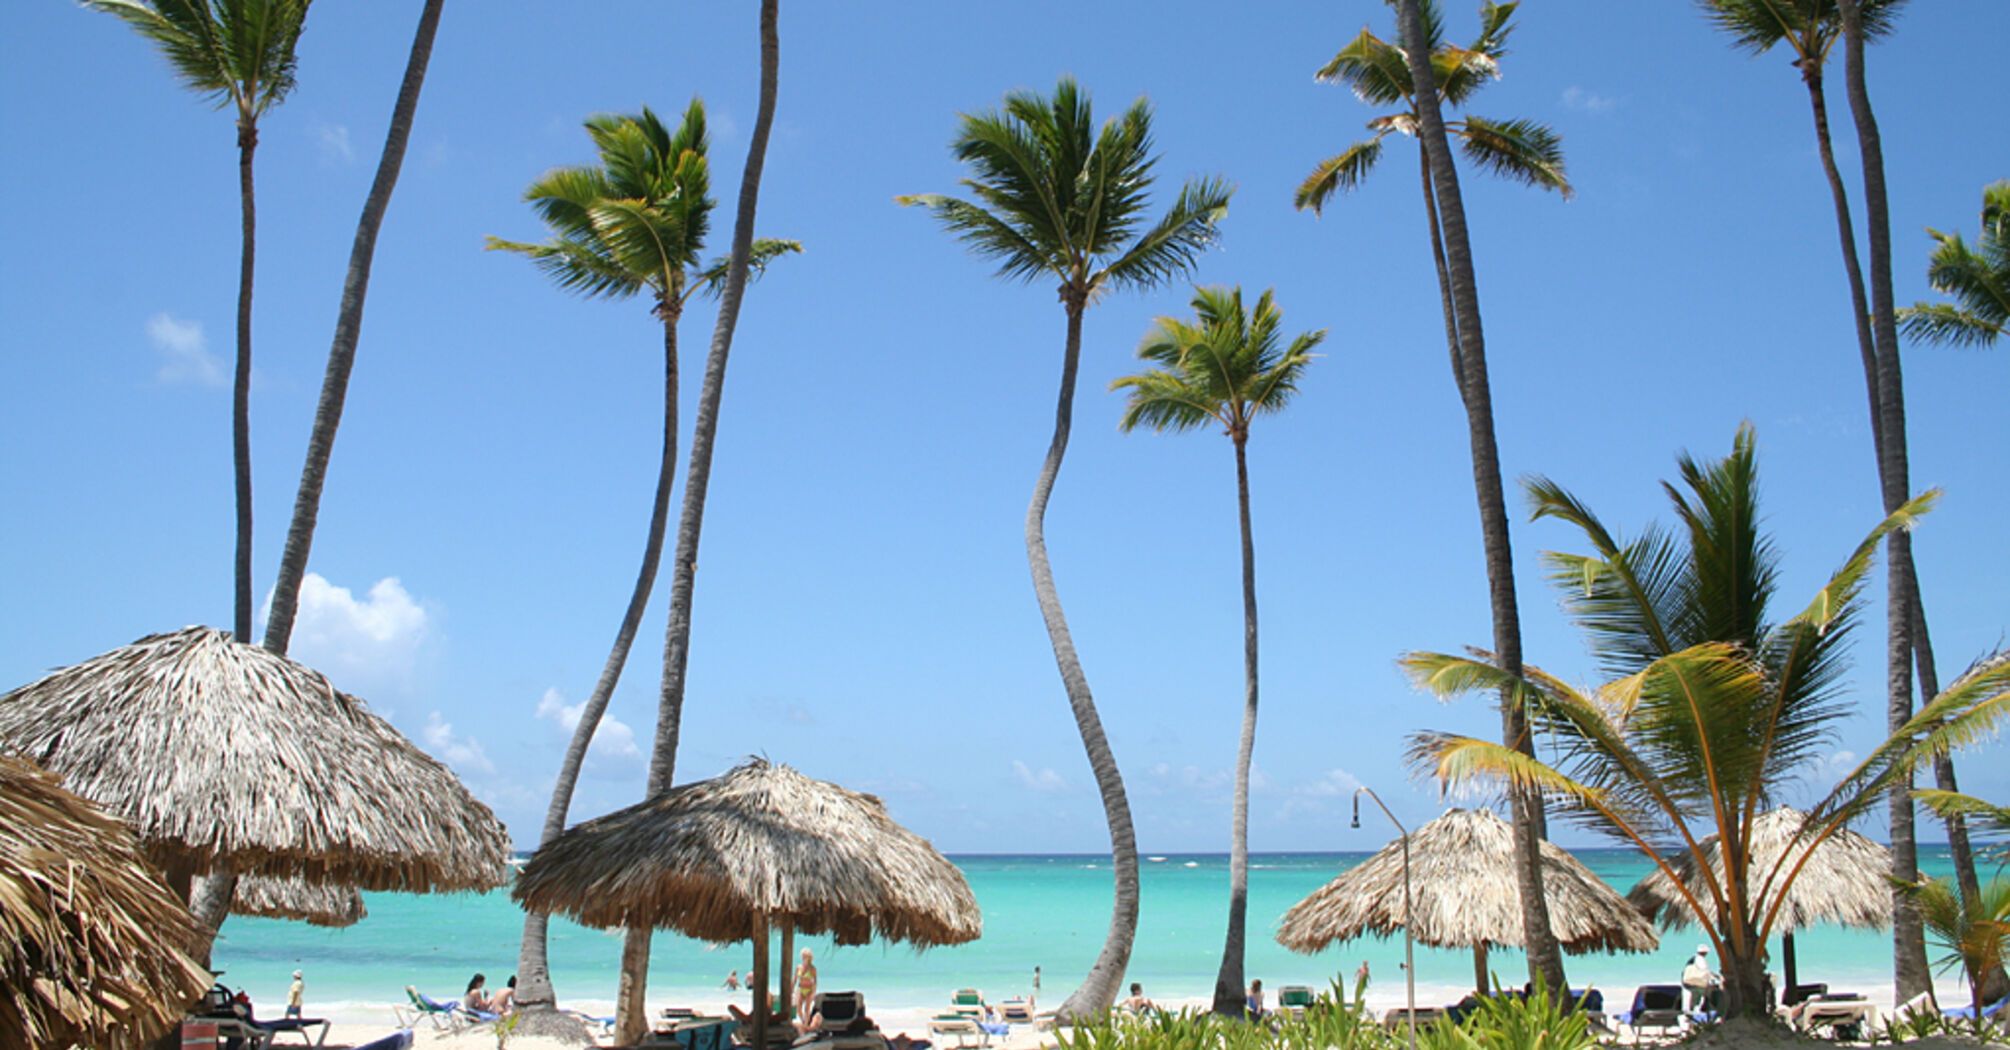 Vacation in Punta Cana, Dominican Republic: this destination is already booked for the spring break